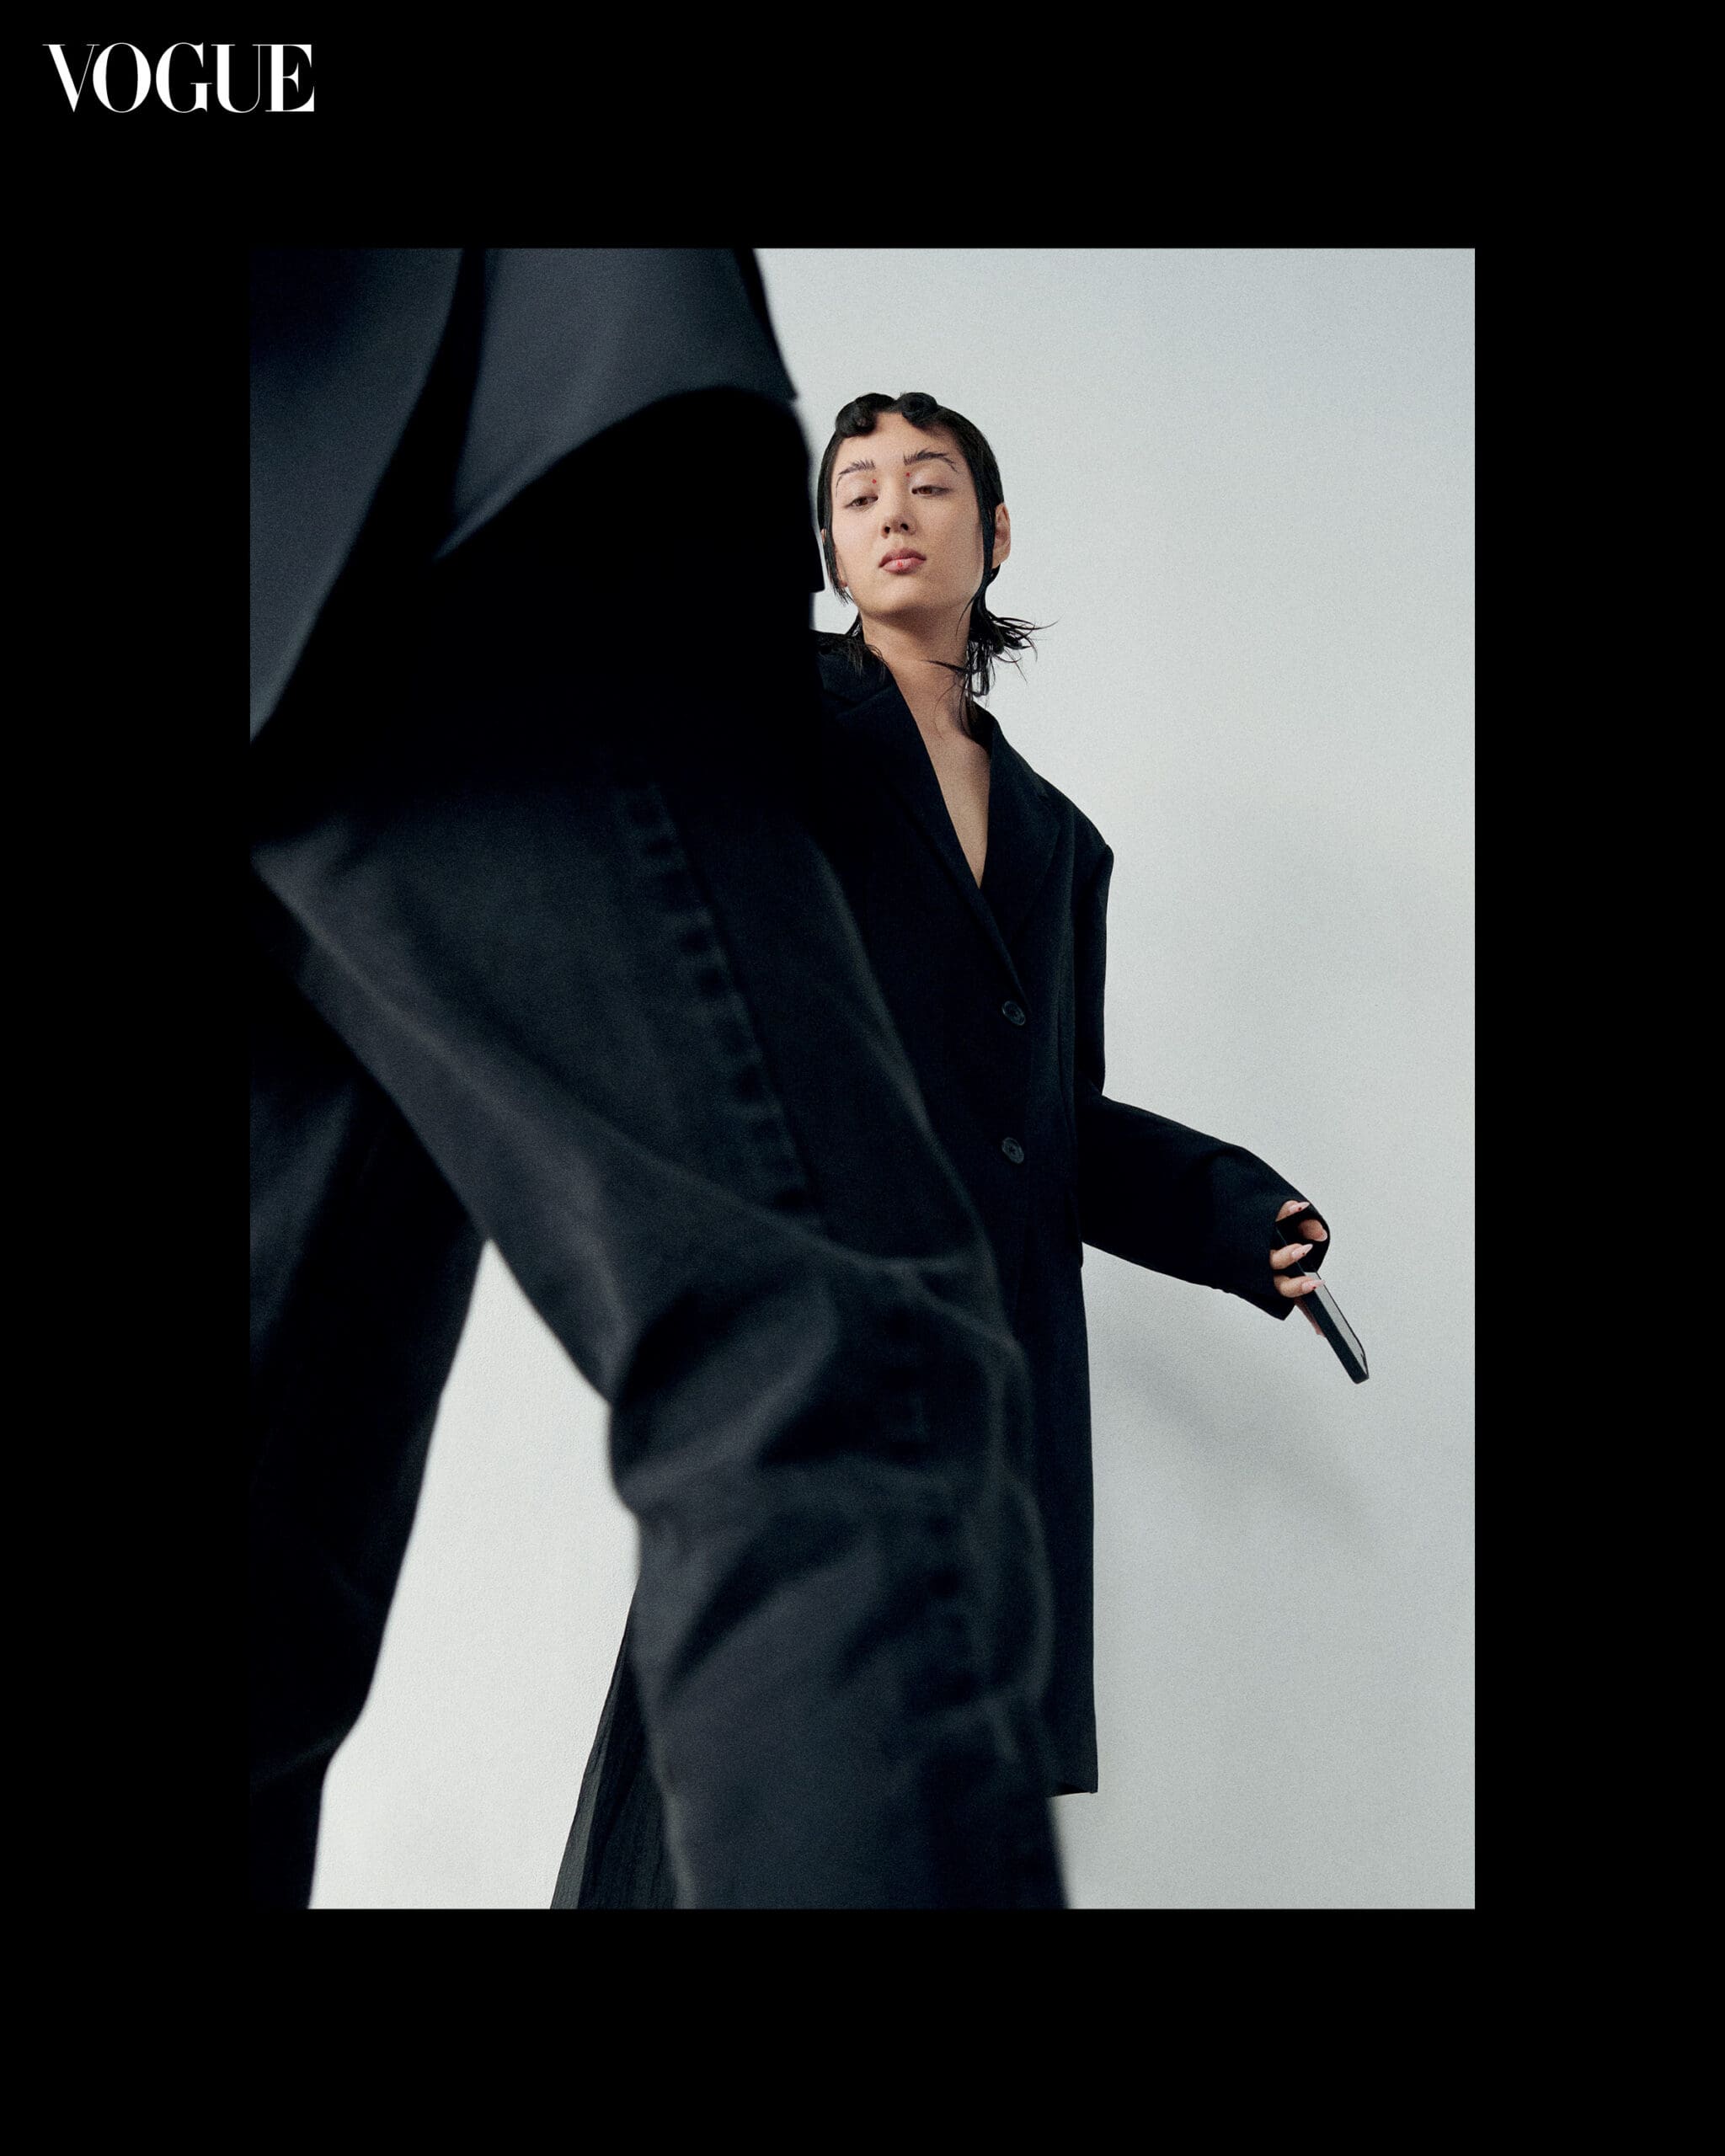 PRADA coat and pants. REPOSSI earrings. Photography and Styling by Melissa Levy